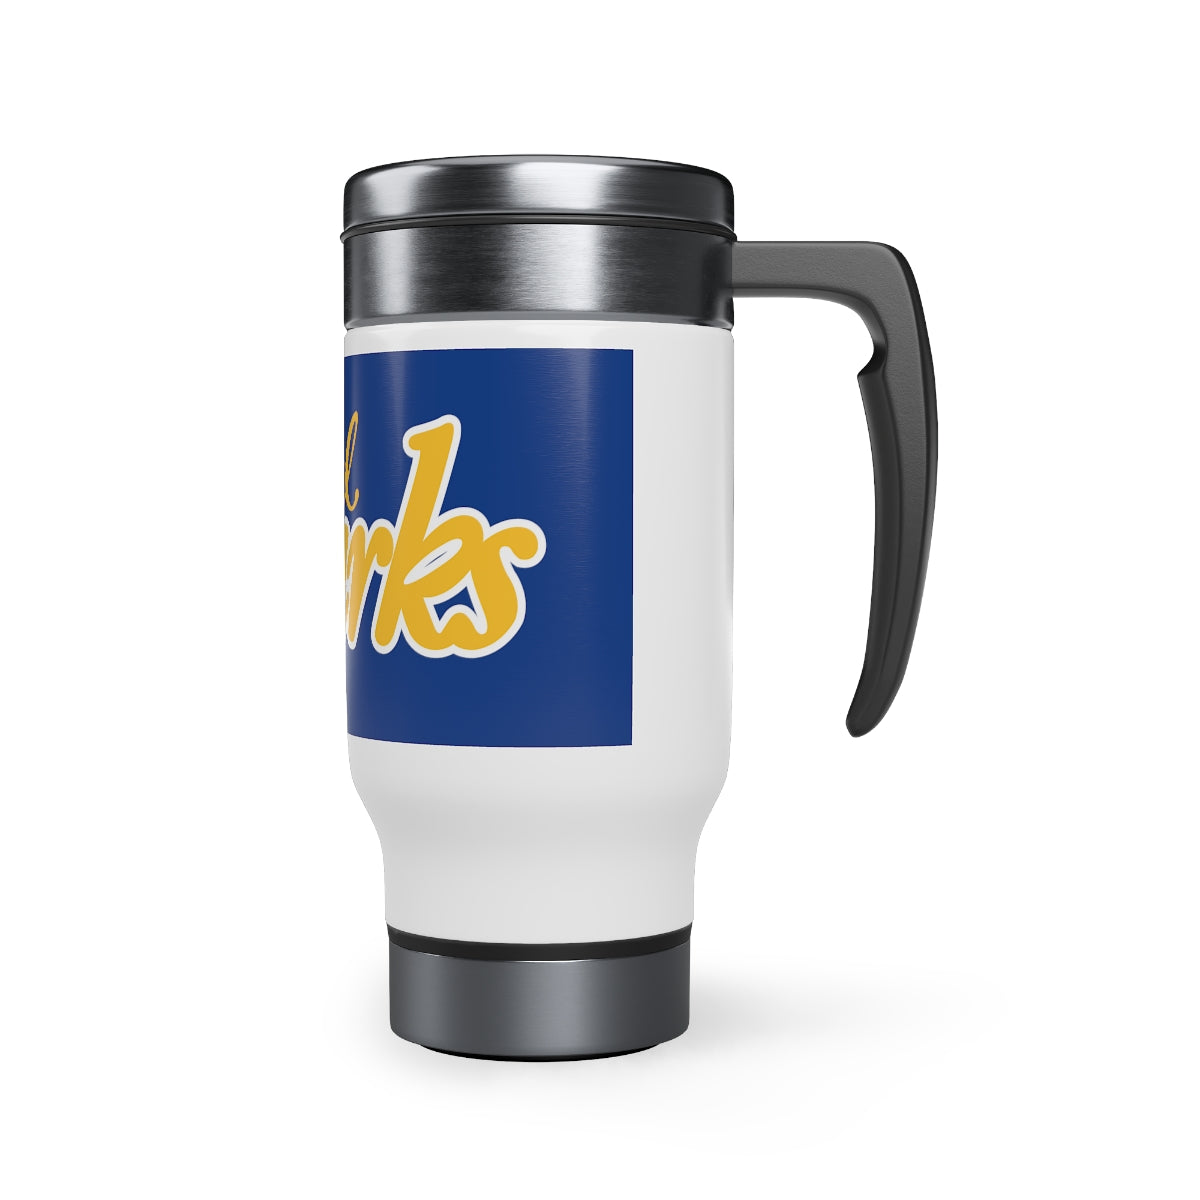 Blue Cal Sparks, Stainless Steel Travel Mug with Handle, 14oz